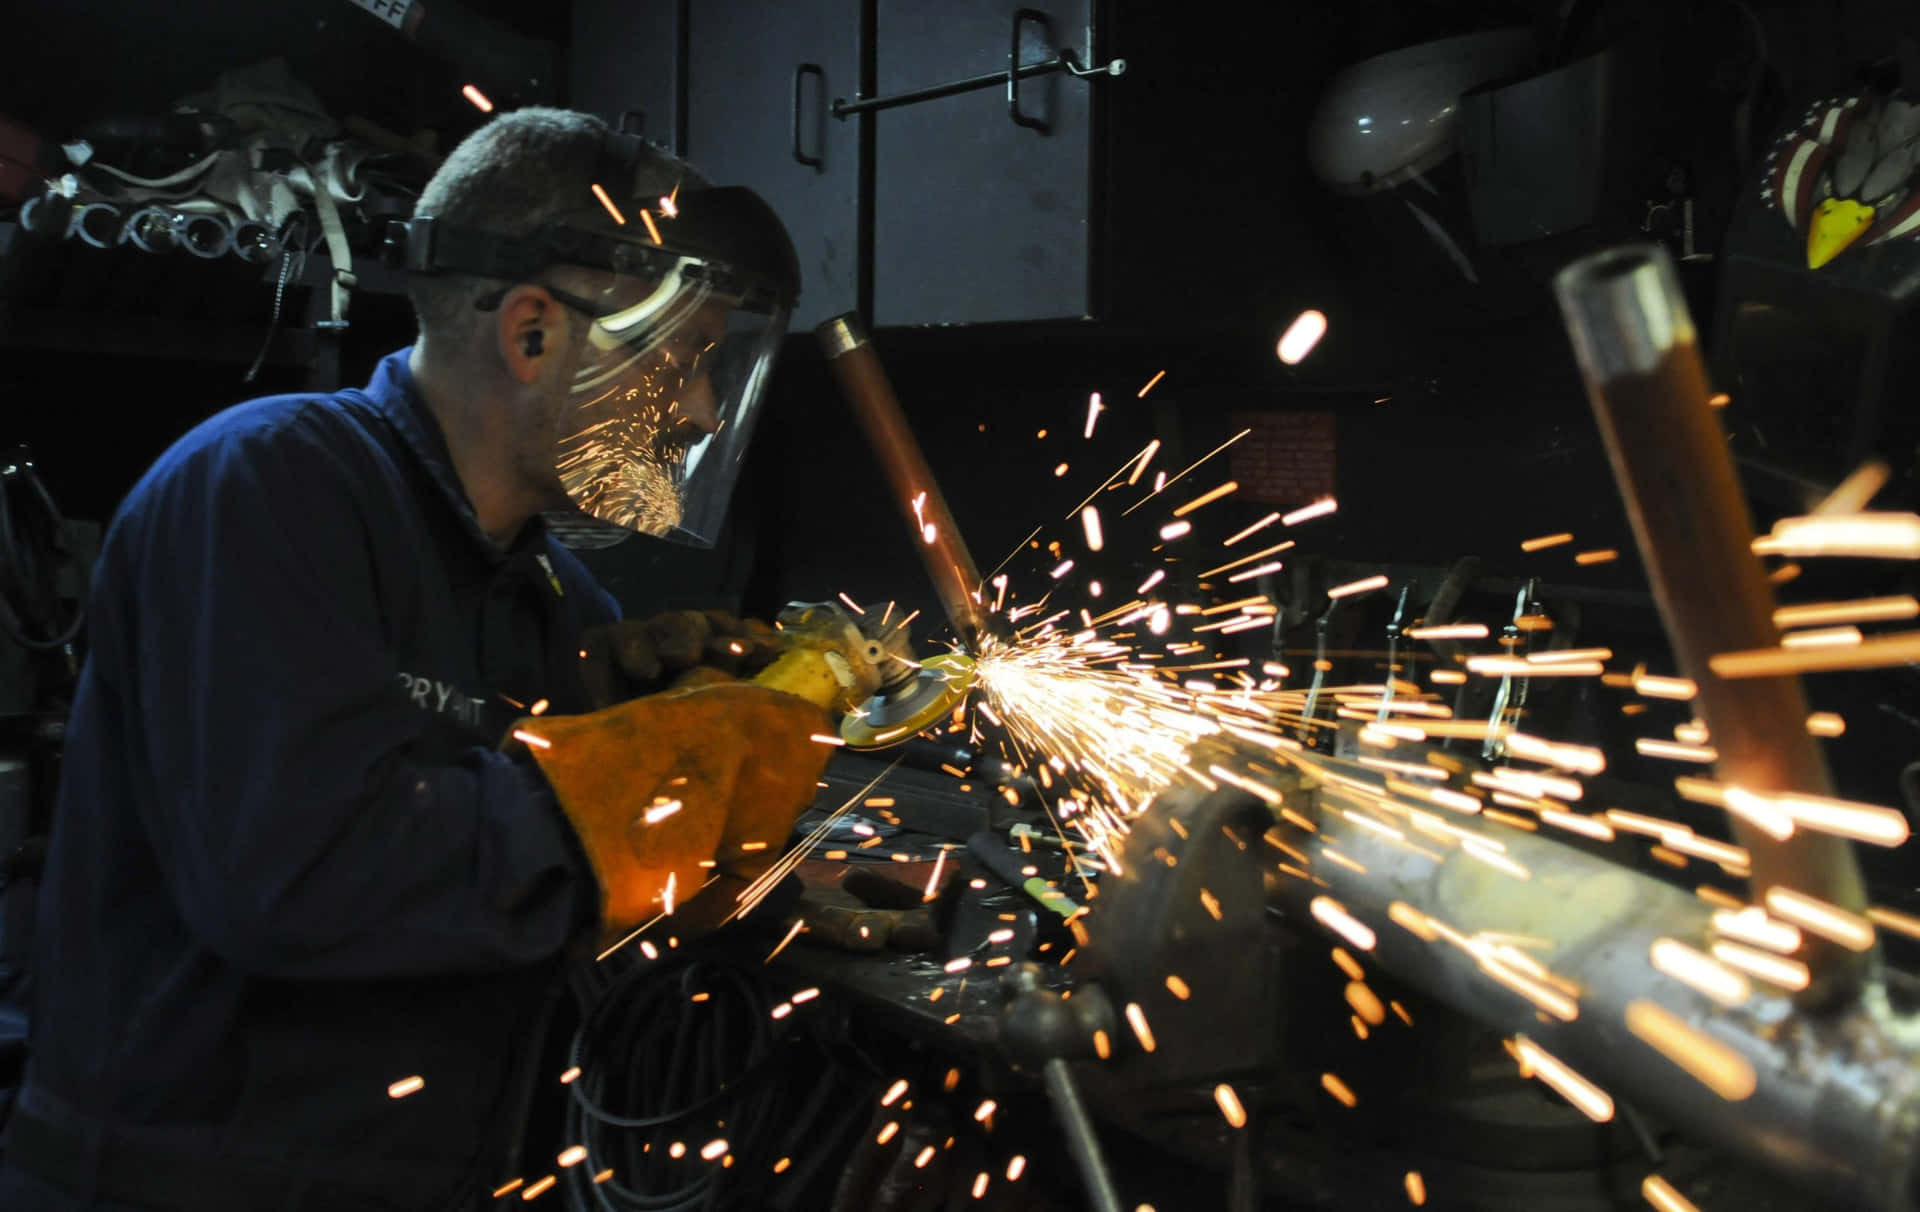 Sparks Fly As Skilled Welder Perfects Welds Background